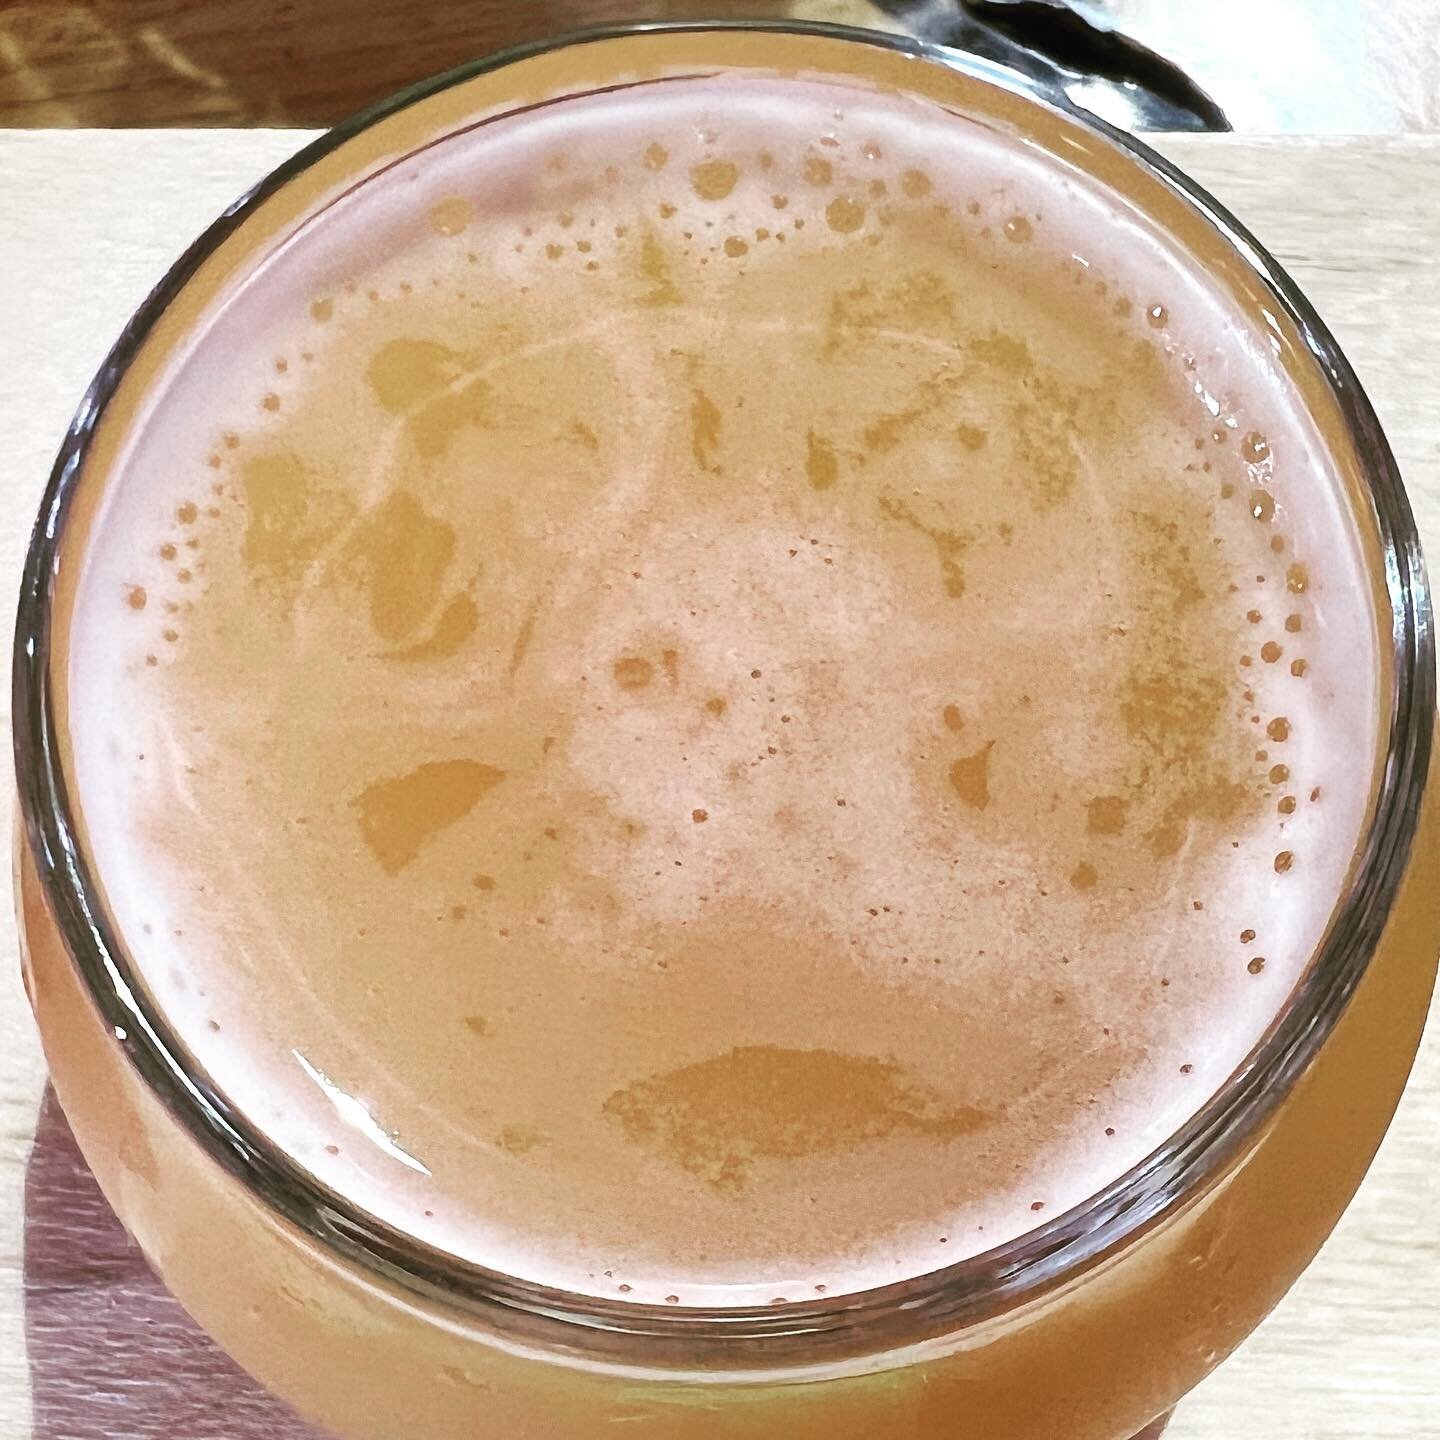 Thee are things happening in this Amor Angela Sour from @drunkenrabbitbrewing &hellip;maybe I see manatee at the bottom? 🏝#beerrorschach
.
.
Parksnpints.com
.
.
#MAbeer #drinklocal #sour #findyourpint #enjowildly #parksnpints